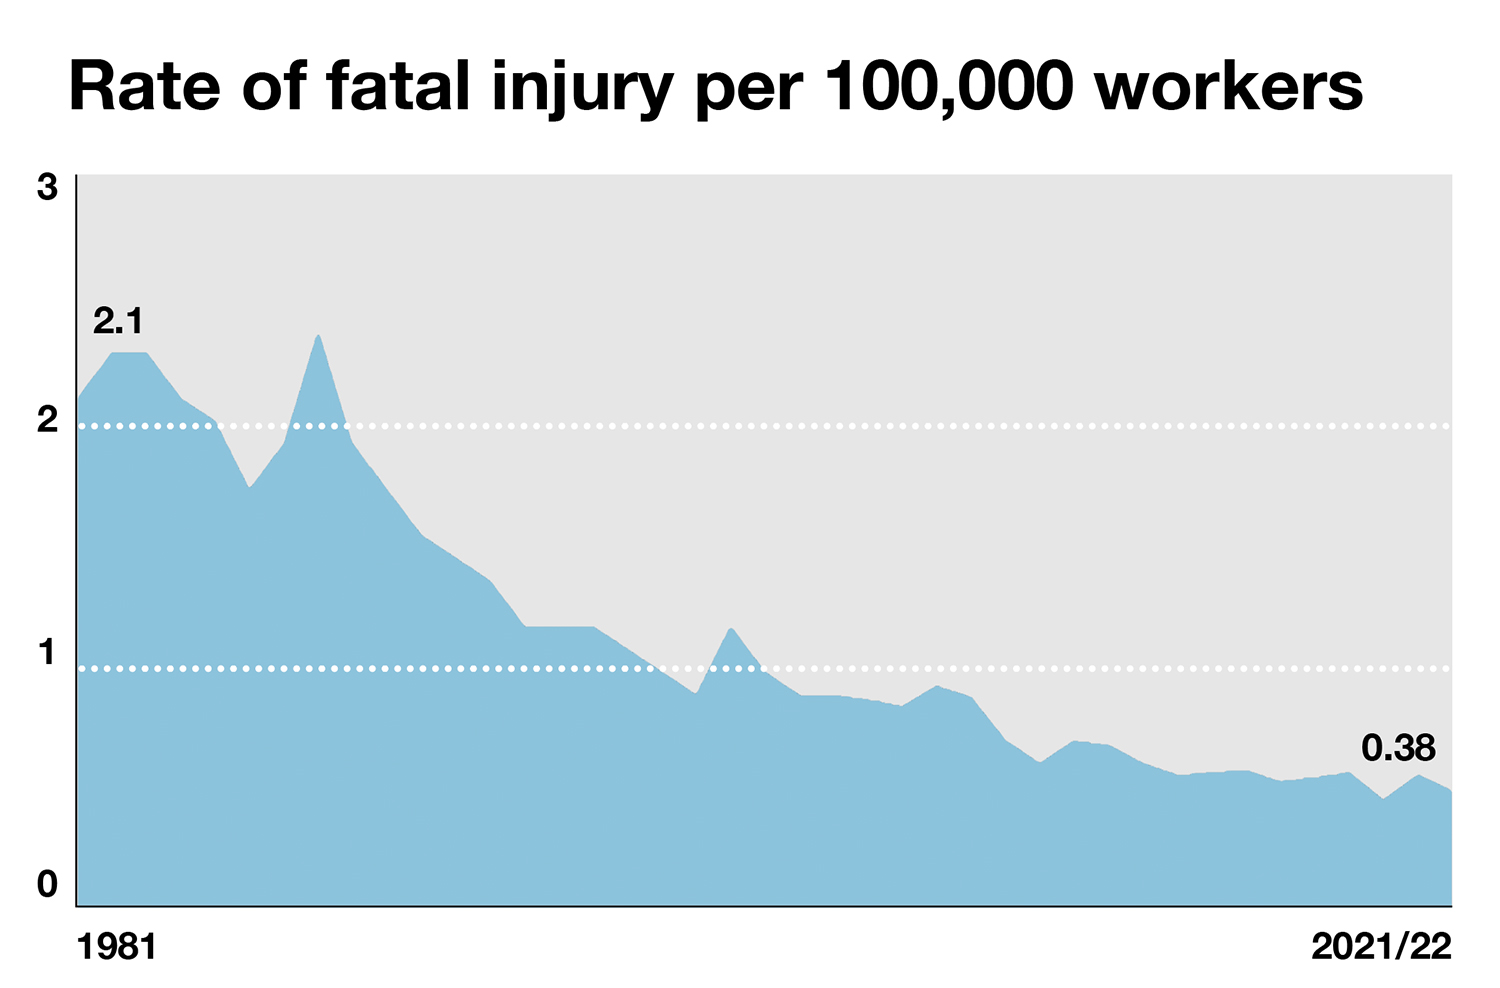 Construction deaths drop - Rate of fatal injury per 100,000 workers